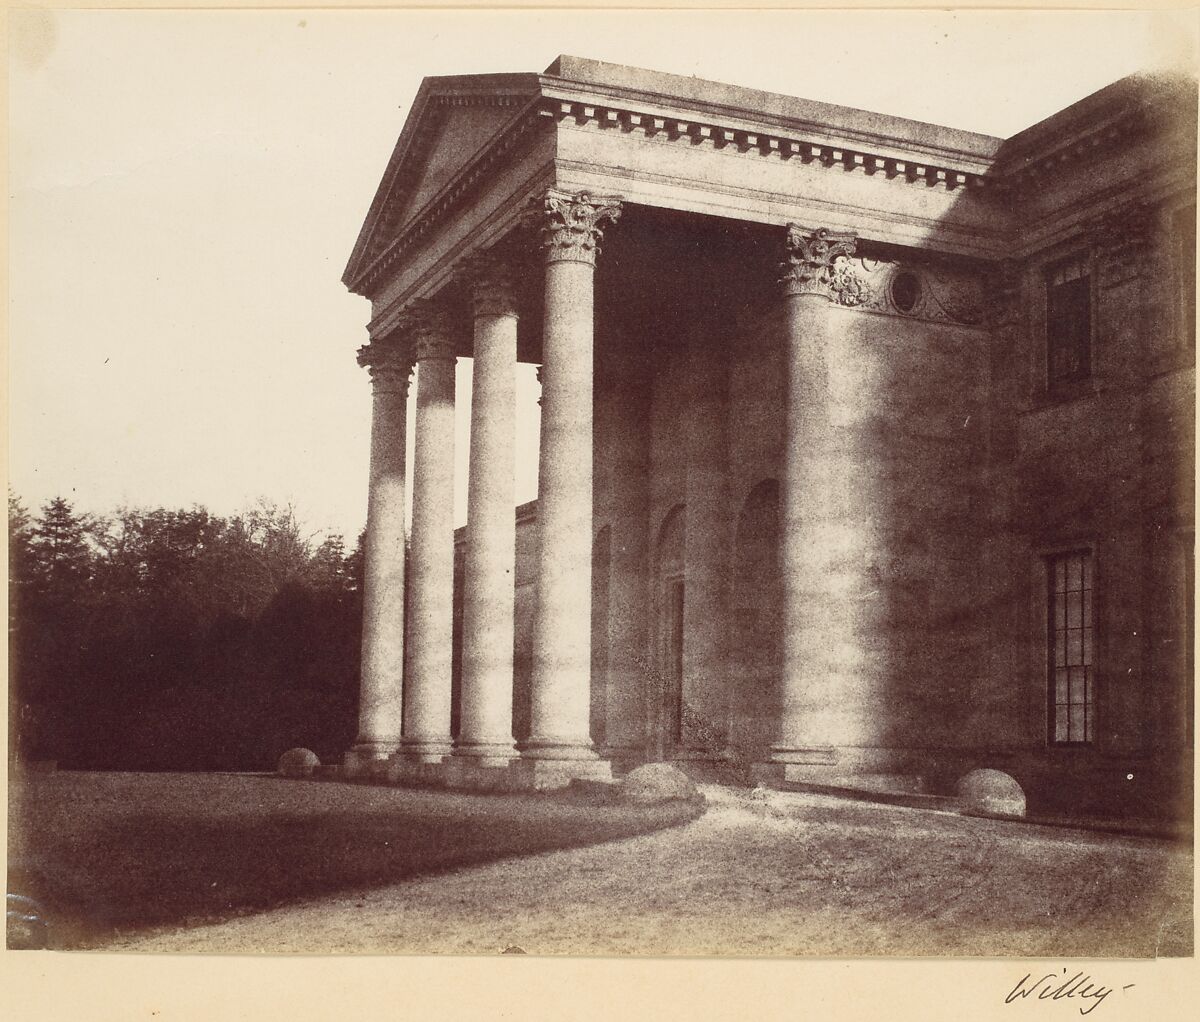 Willey, Alfred Capel Cure (British, 1826–1896), Albumen silver print from paper negative 